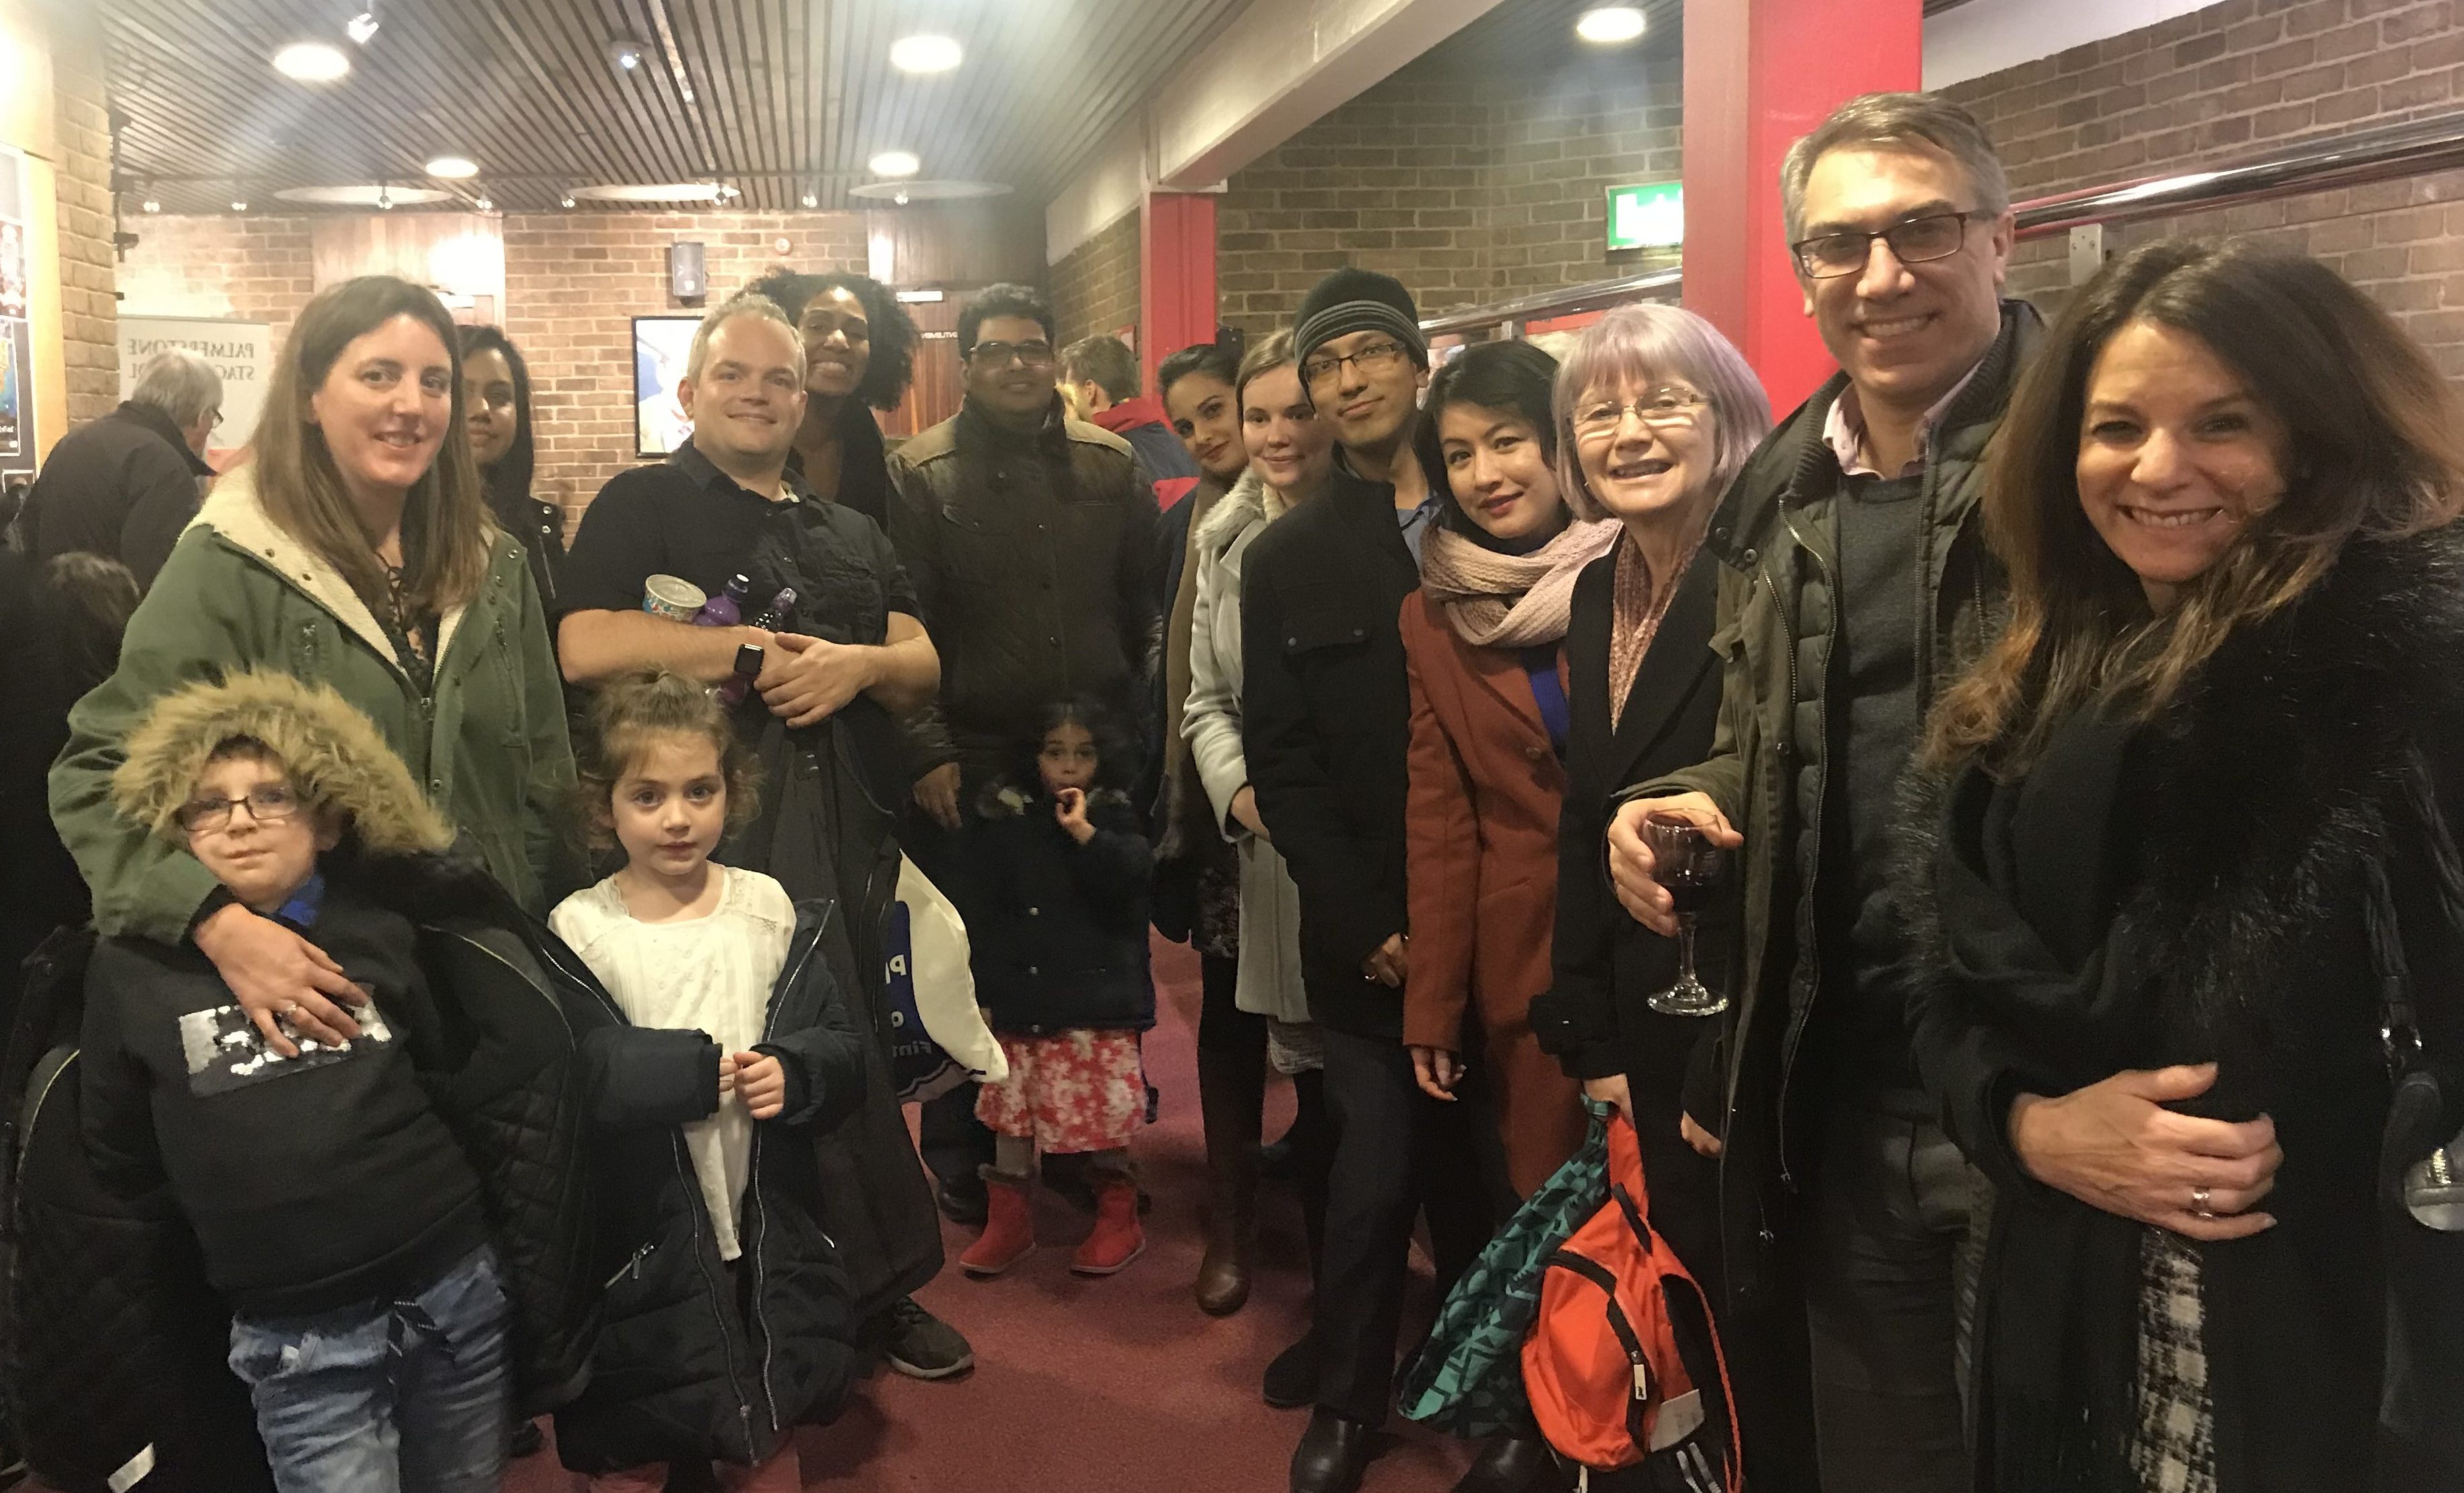 Team Social – Peter Pan at the Kenneth More Theatre